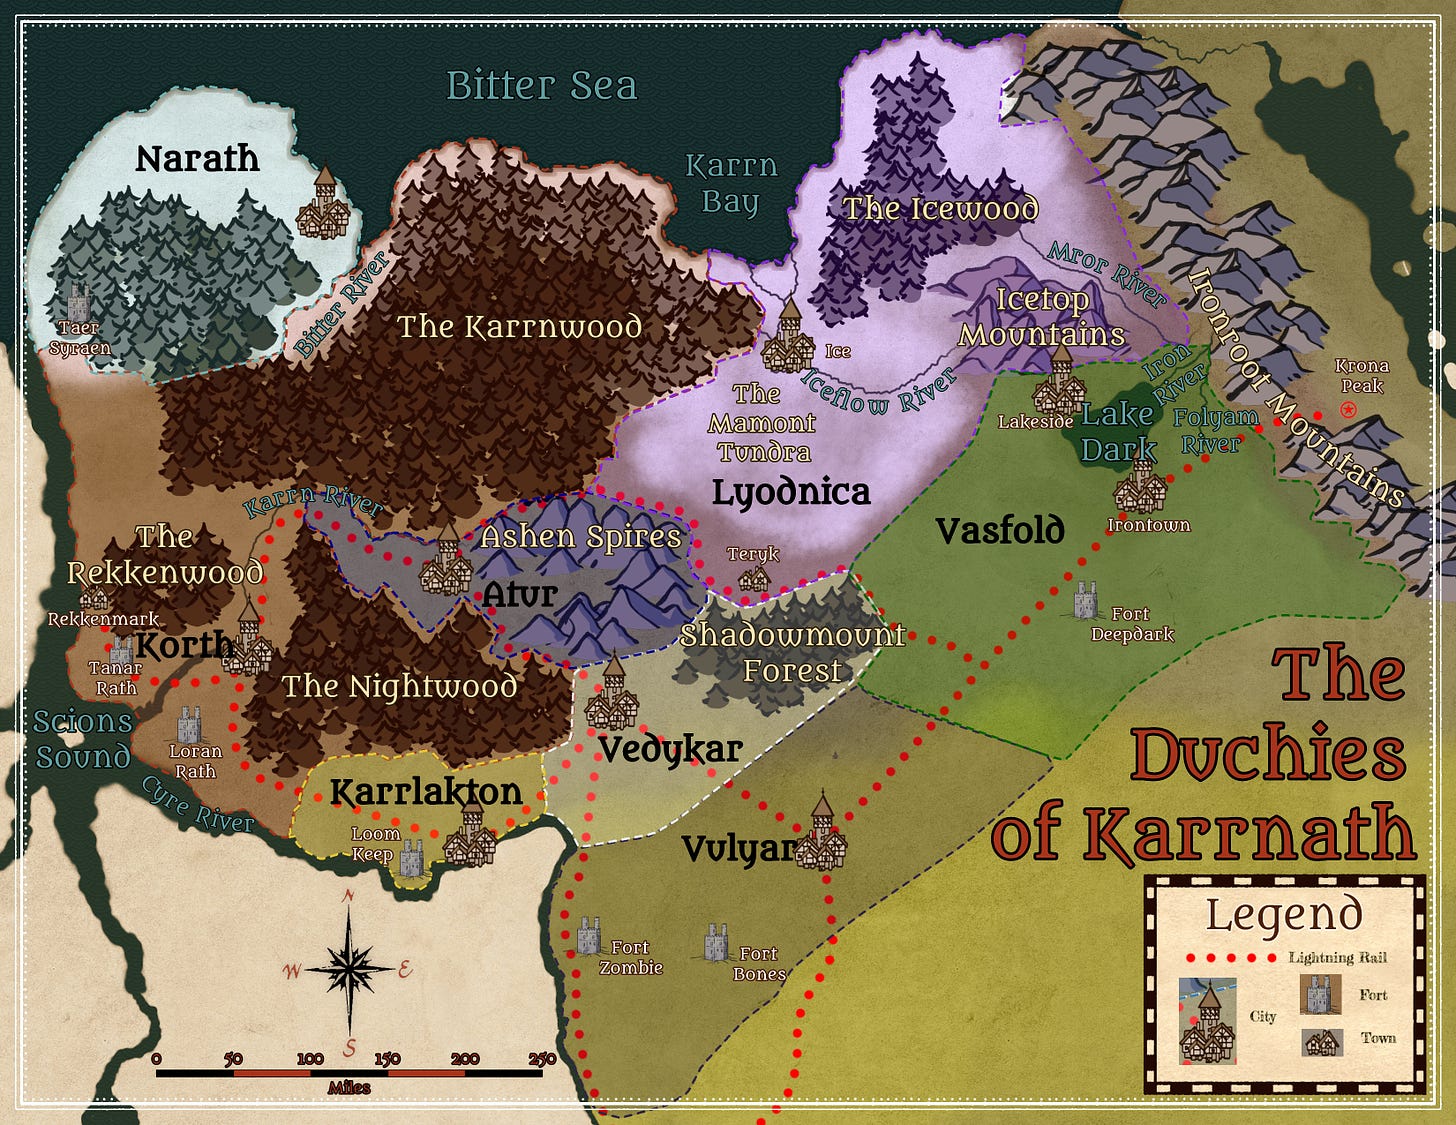 A map of the Duchies of Karrnath